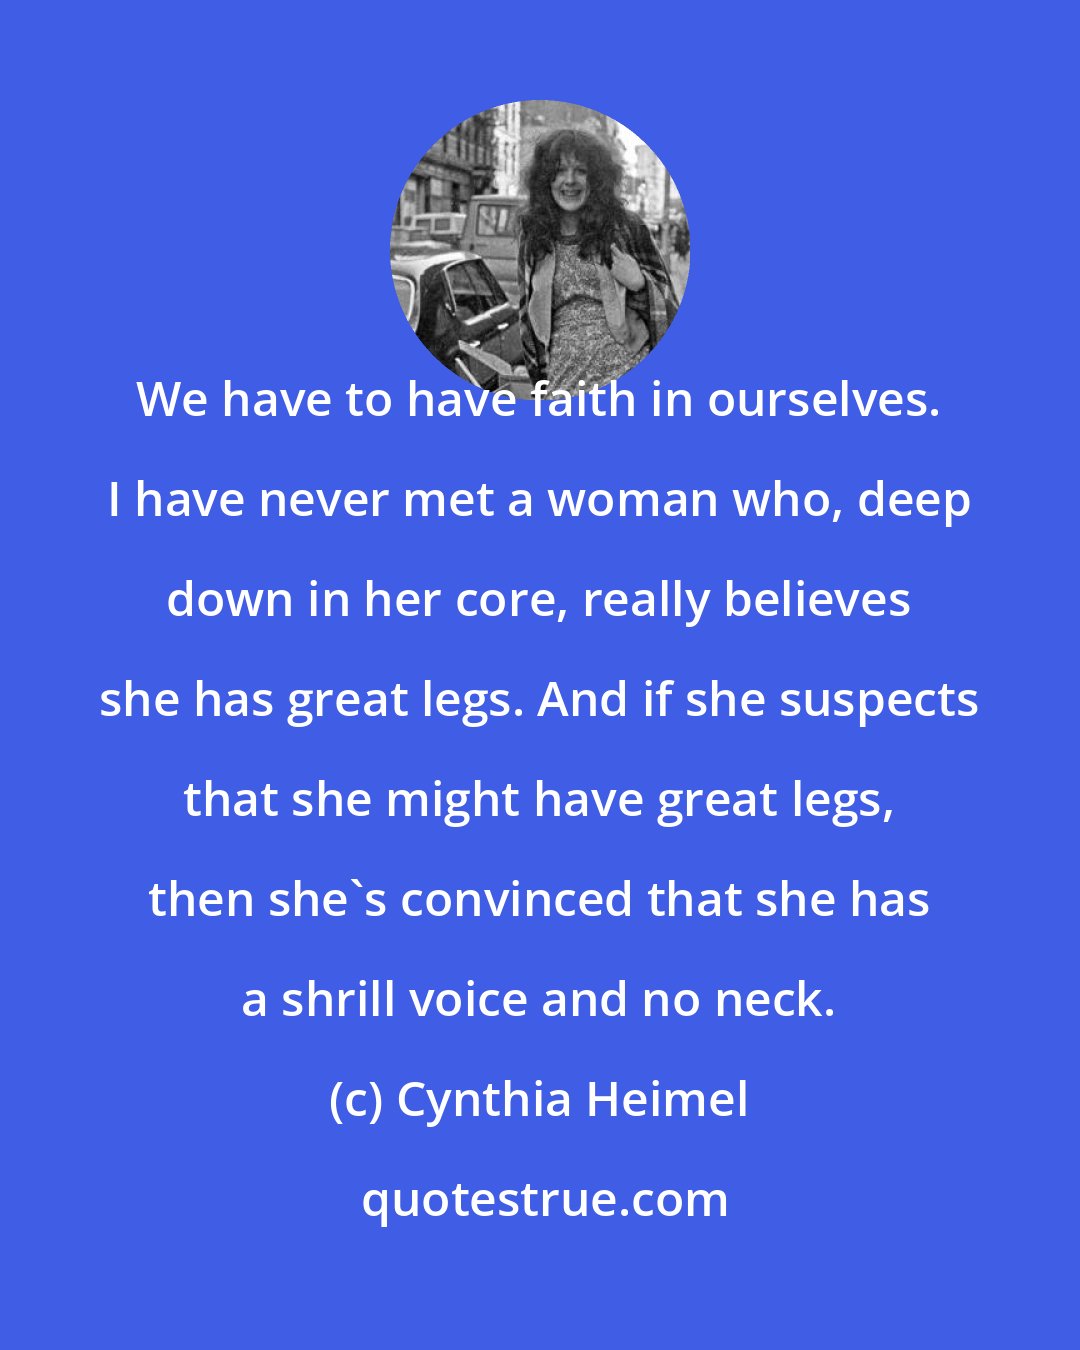 Cynthia Heimel: We have to have faith in ourselves. I have never met a woman who, deep down in her core, really believes she has great legs. And if she suspects that she might have great legs, then she's convinced that she has a shrill voice and no neck.